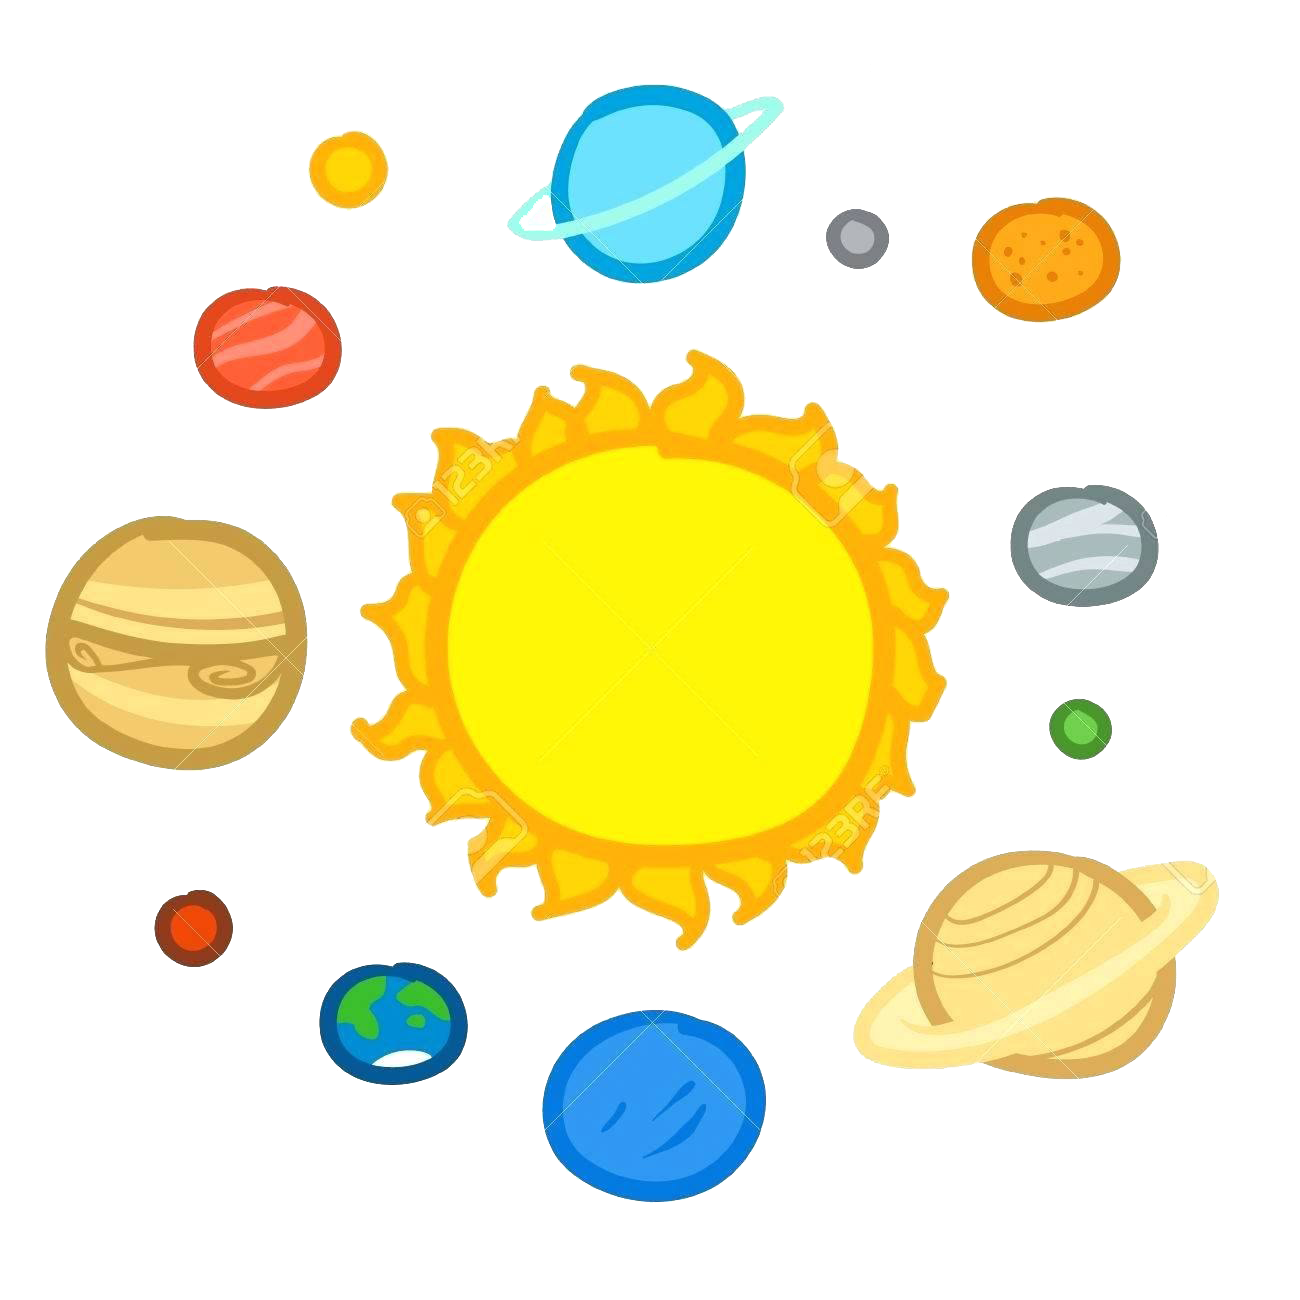 Solar System PNG Pic